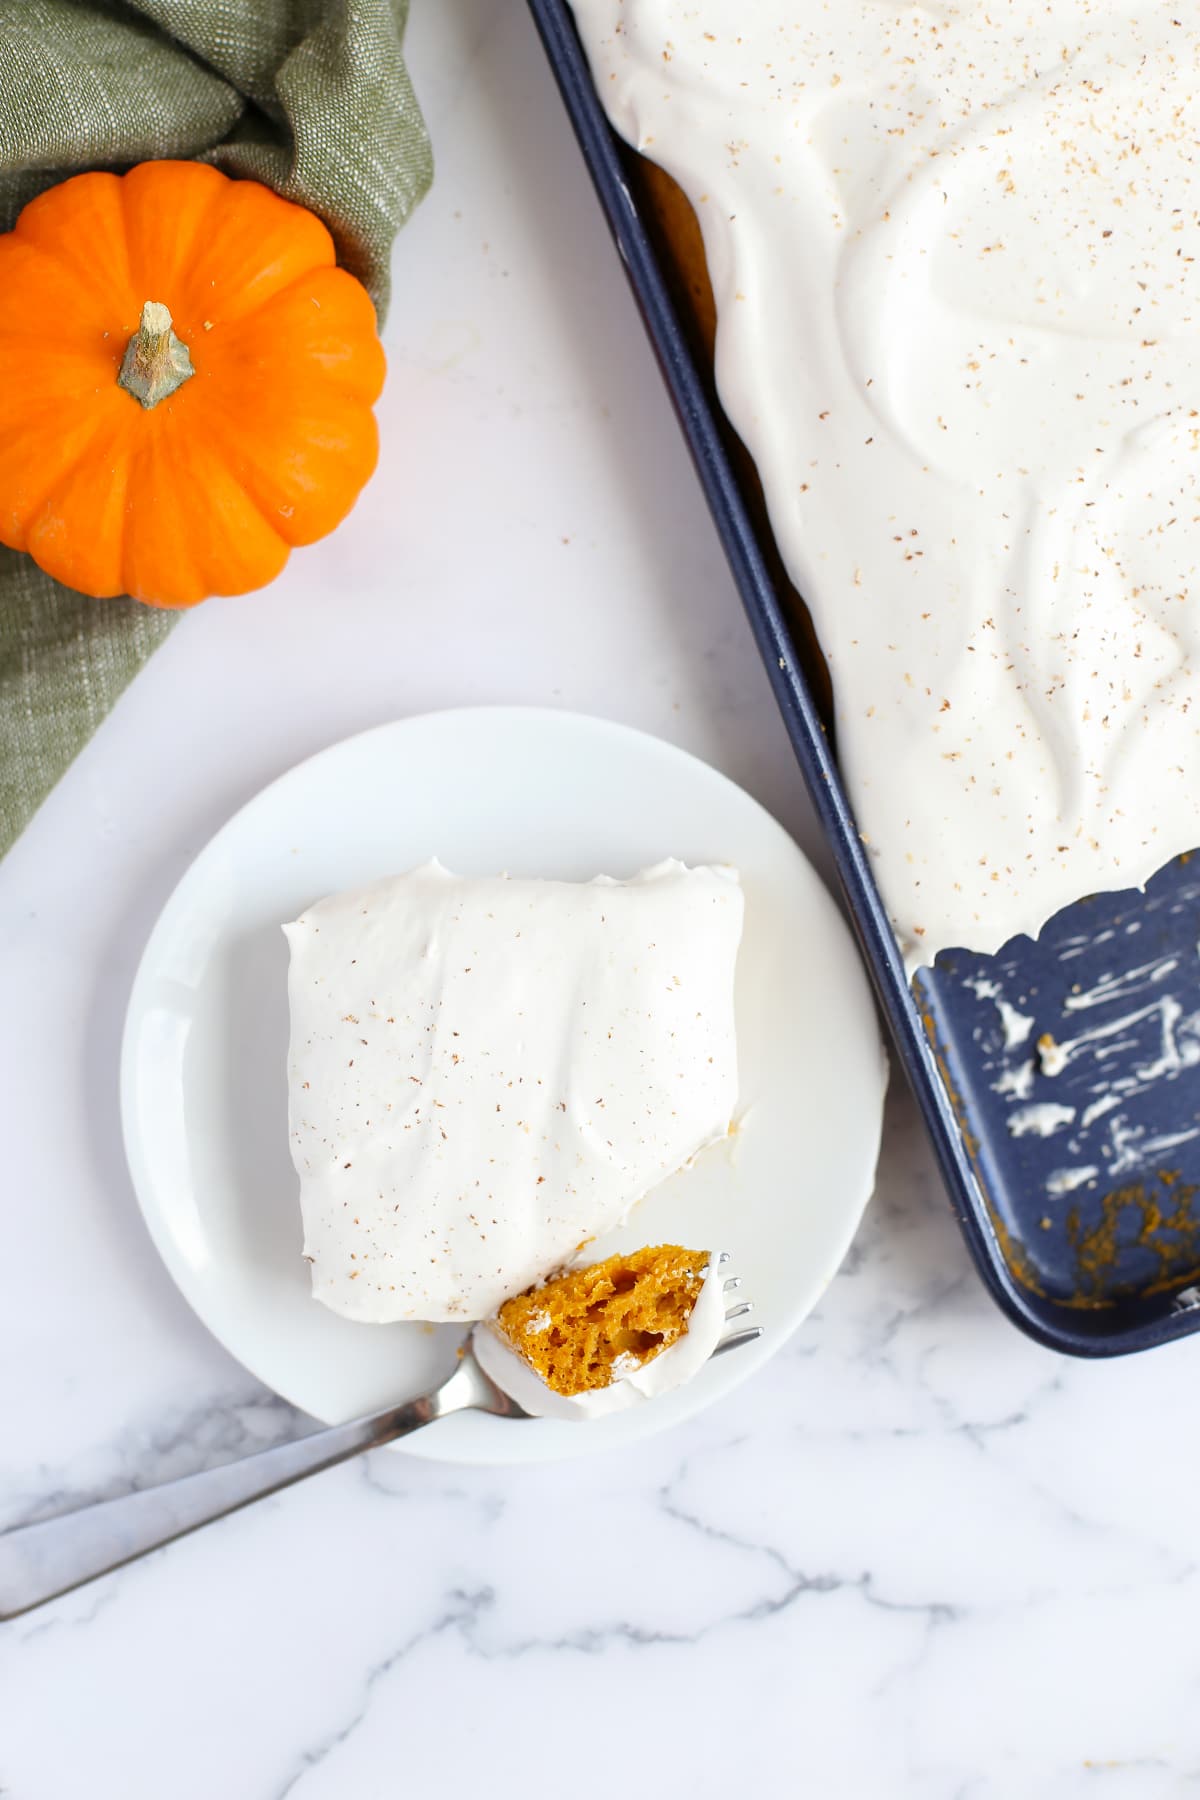 A slice of pumpkin cake with a whipped topping sprinkled with cinnamon.